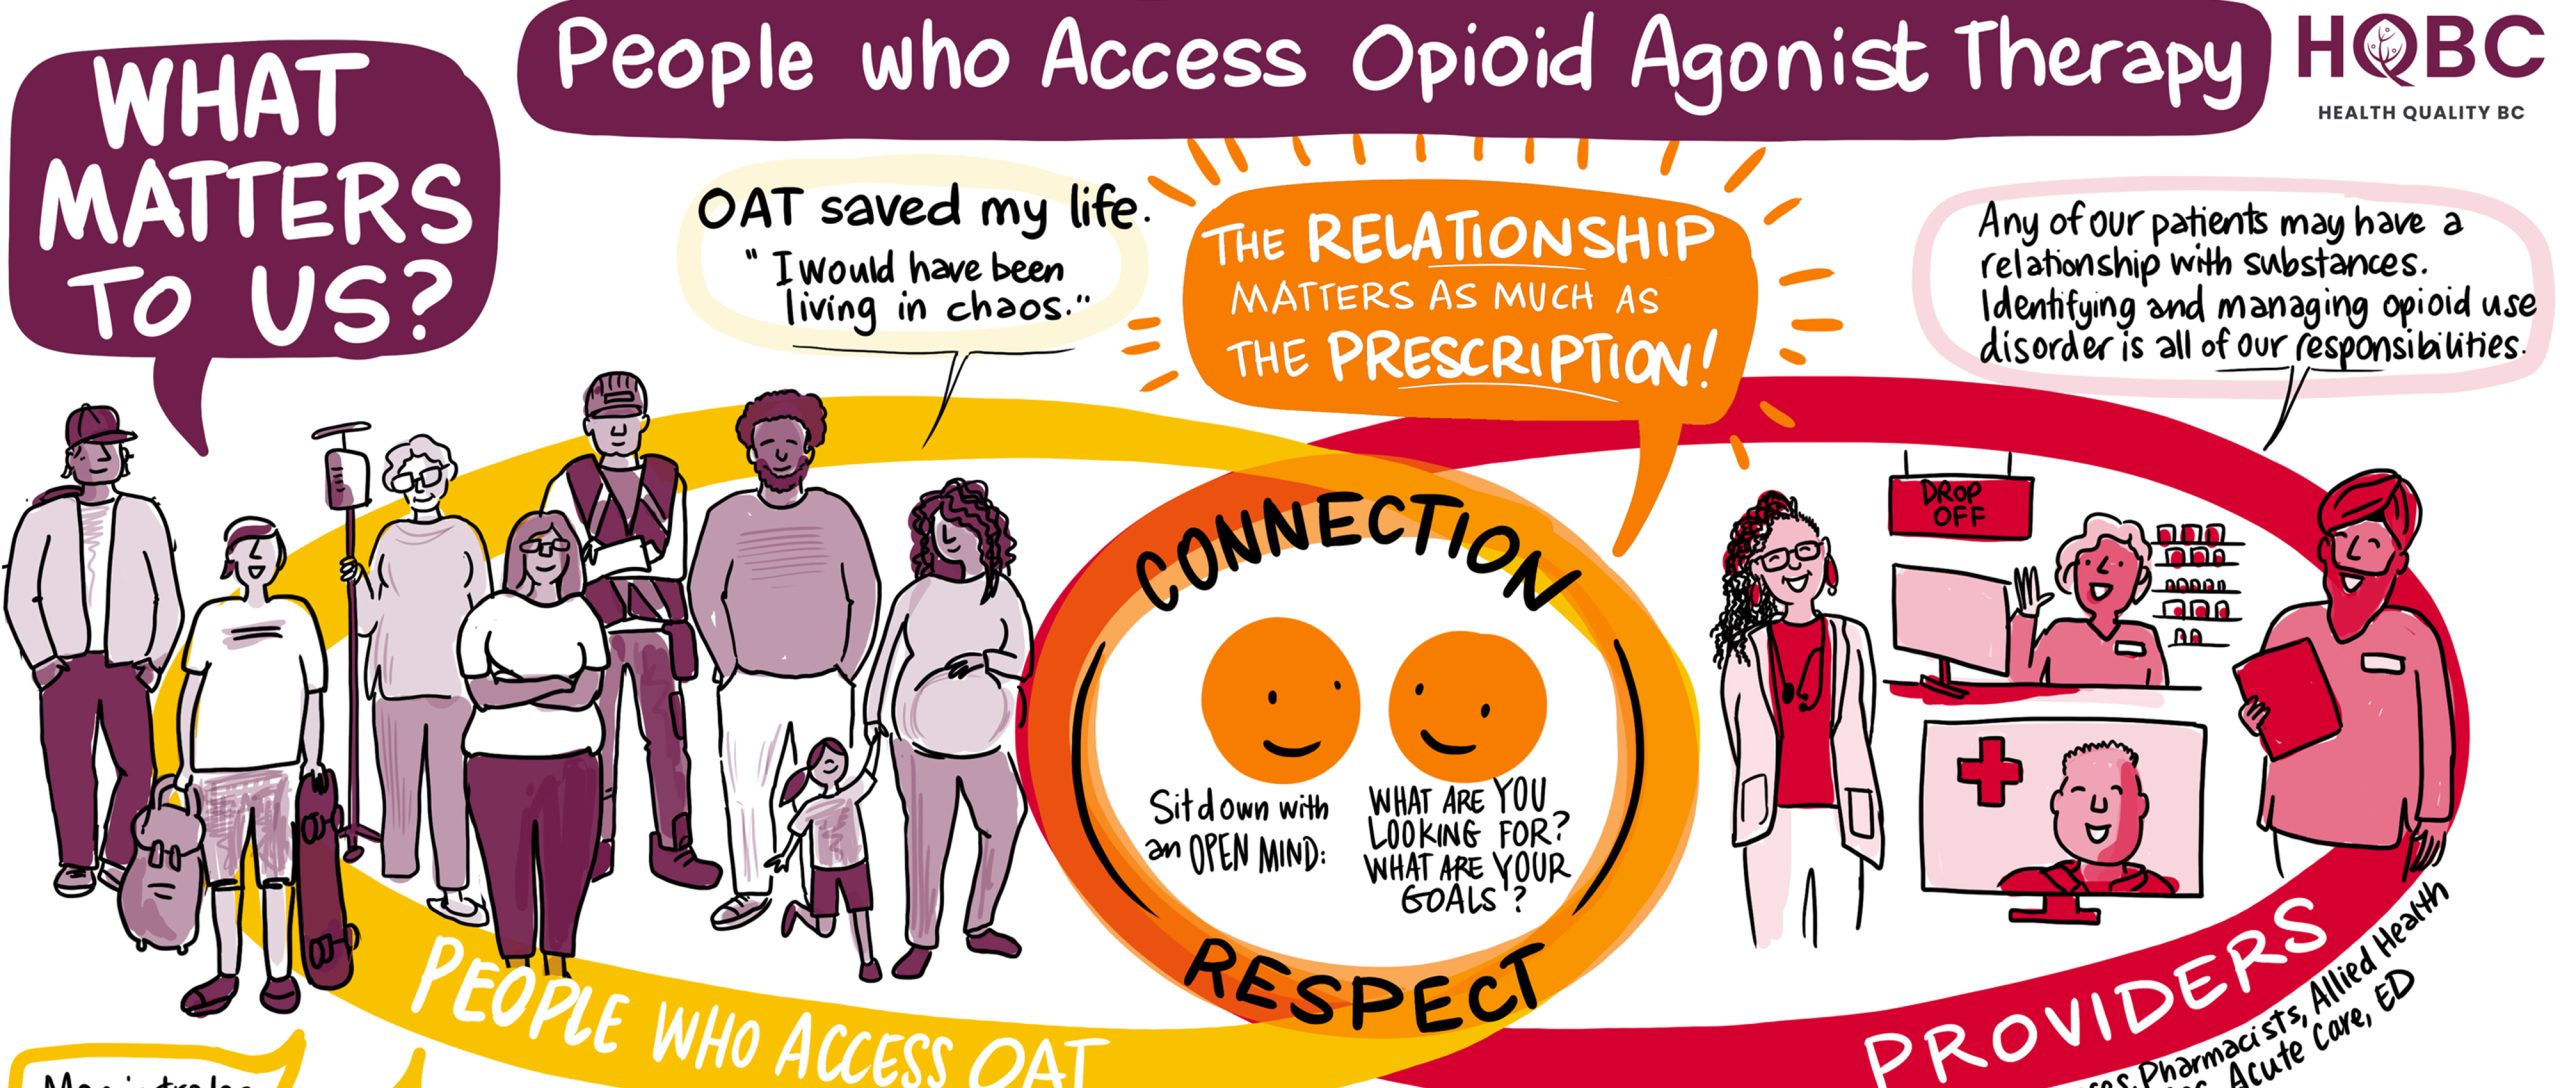 illustrated journey map about accessing and delivering opioid agonist treatment (OAT) in BC, illustrated by drawing change sam bradd - provider and PWLLE experiences